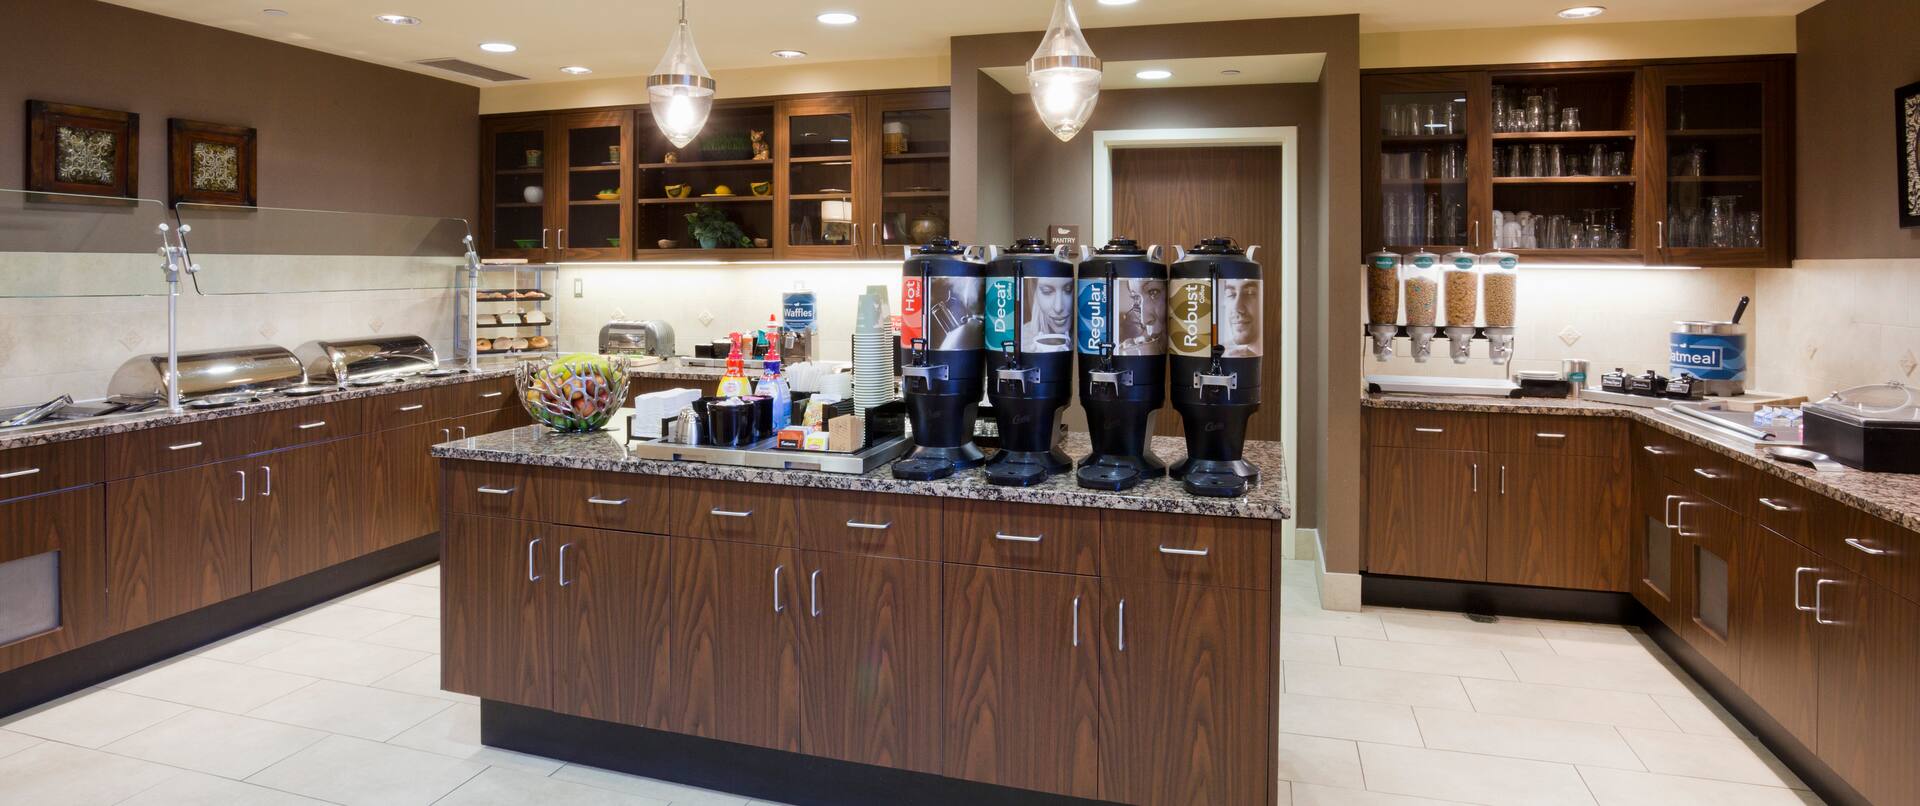 Homewood Suites by Hilton Minneapolis- St. Louis Park at West End Hotel, MN - Enjoy breakfast on us!